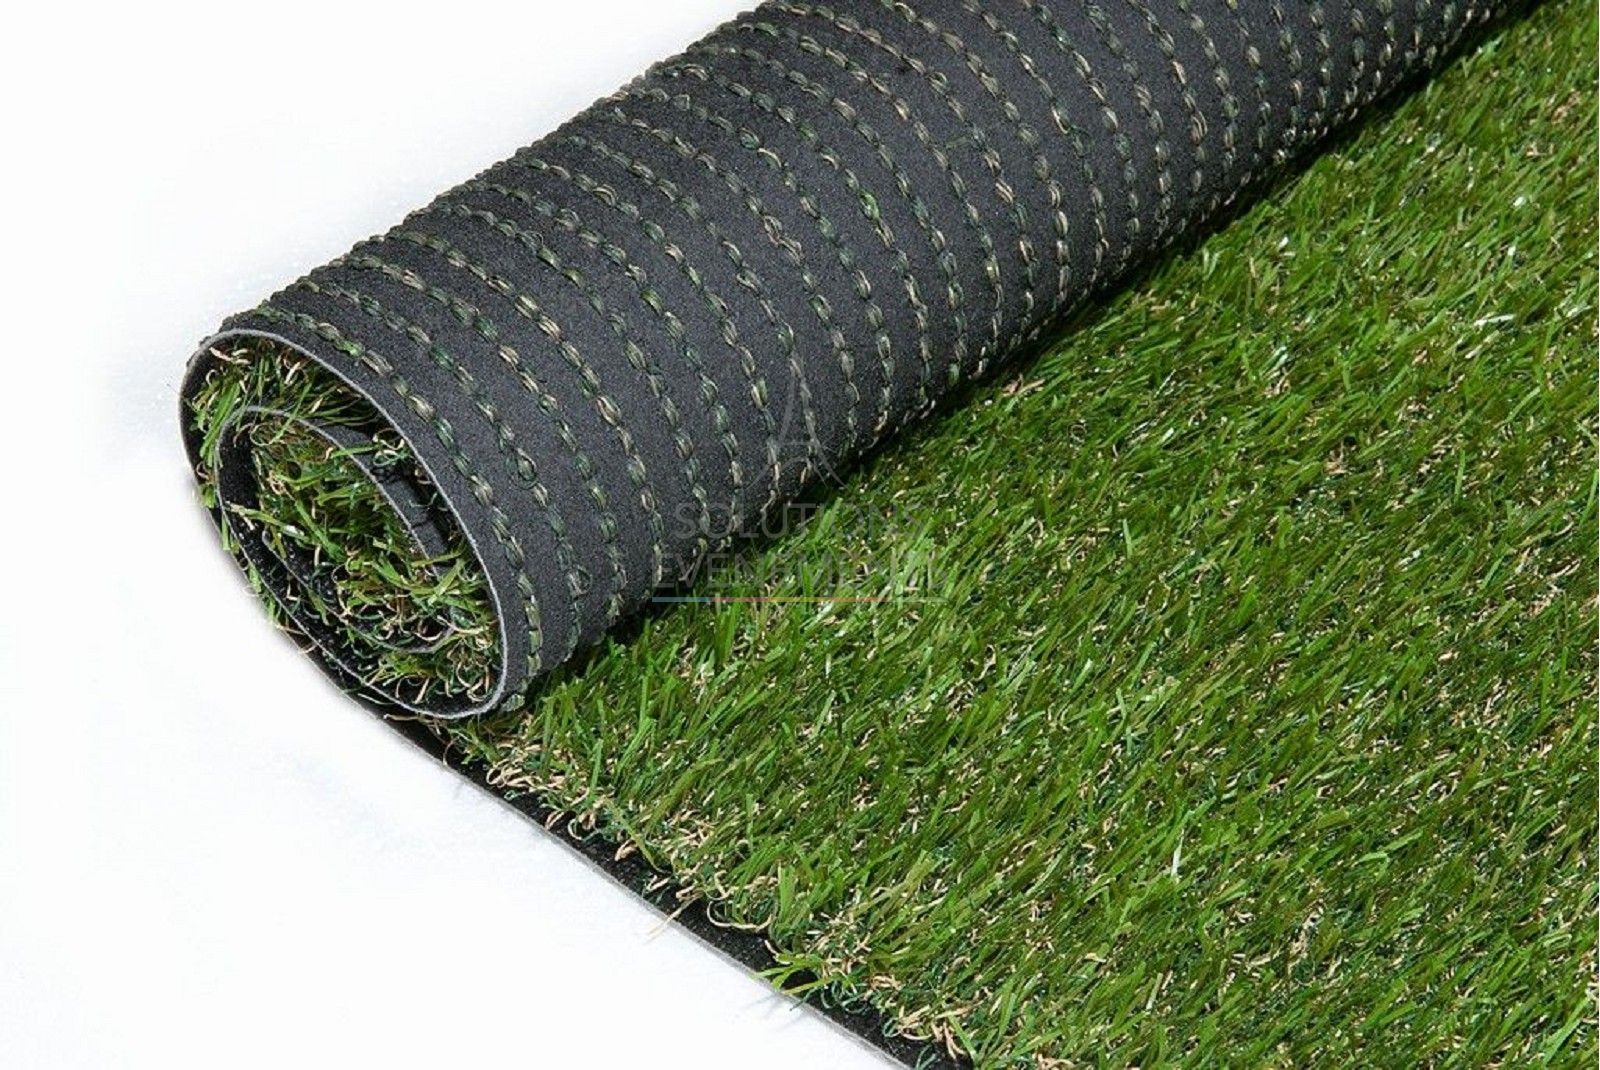 Rental of synthetic artificial grass